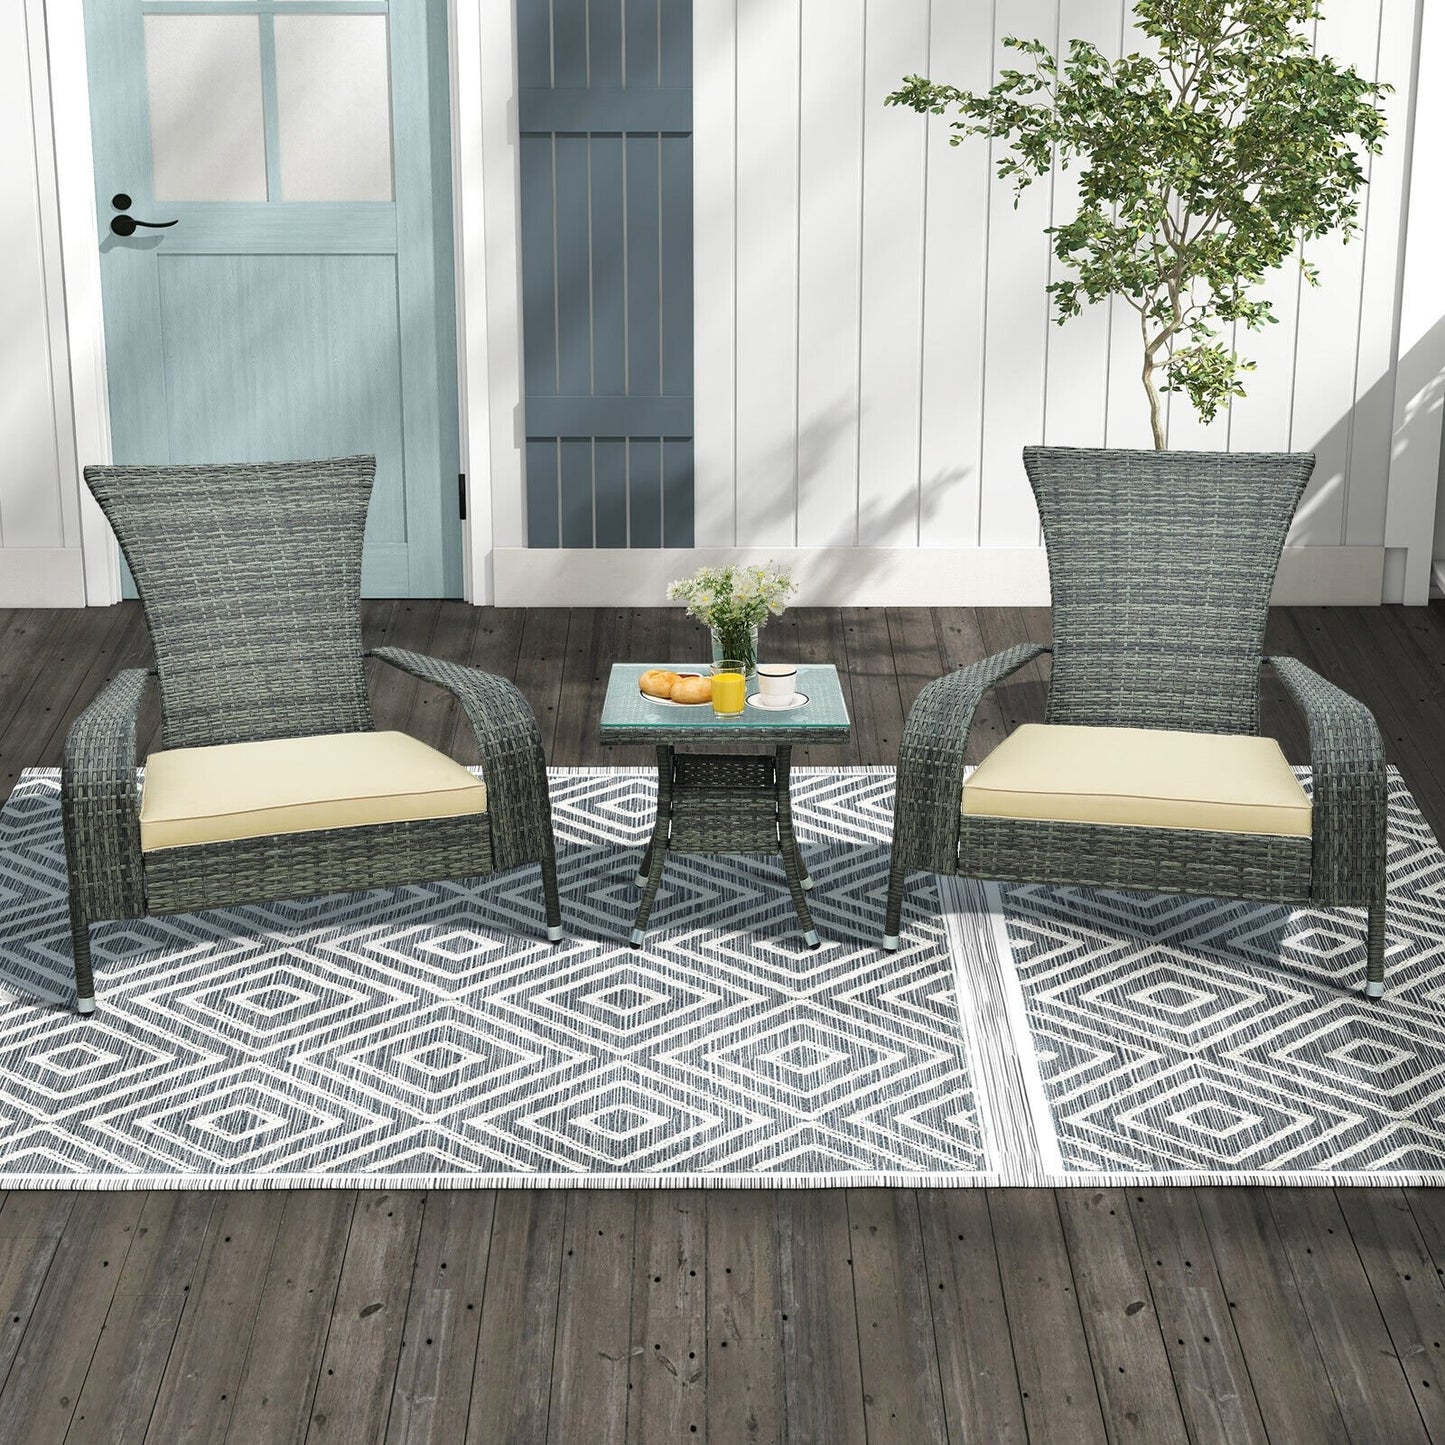 3-Piece Wicker Adirondack Set with Comfy Seat Cushions, Gray